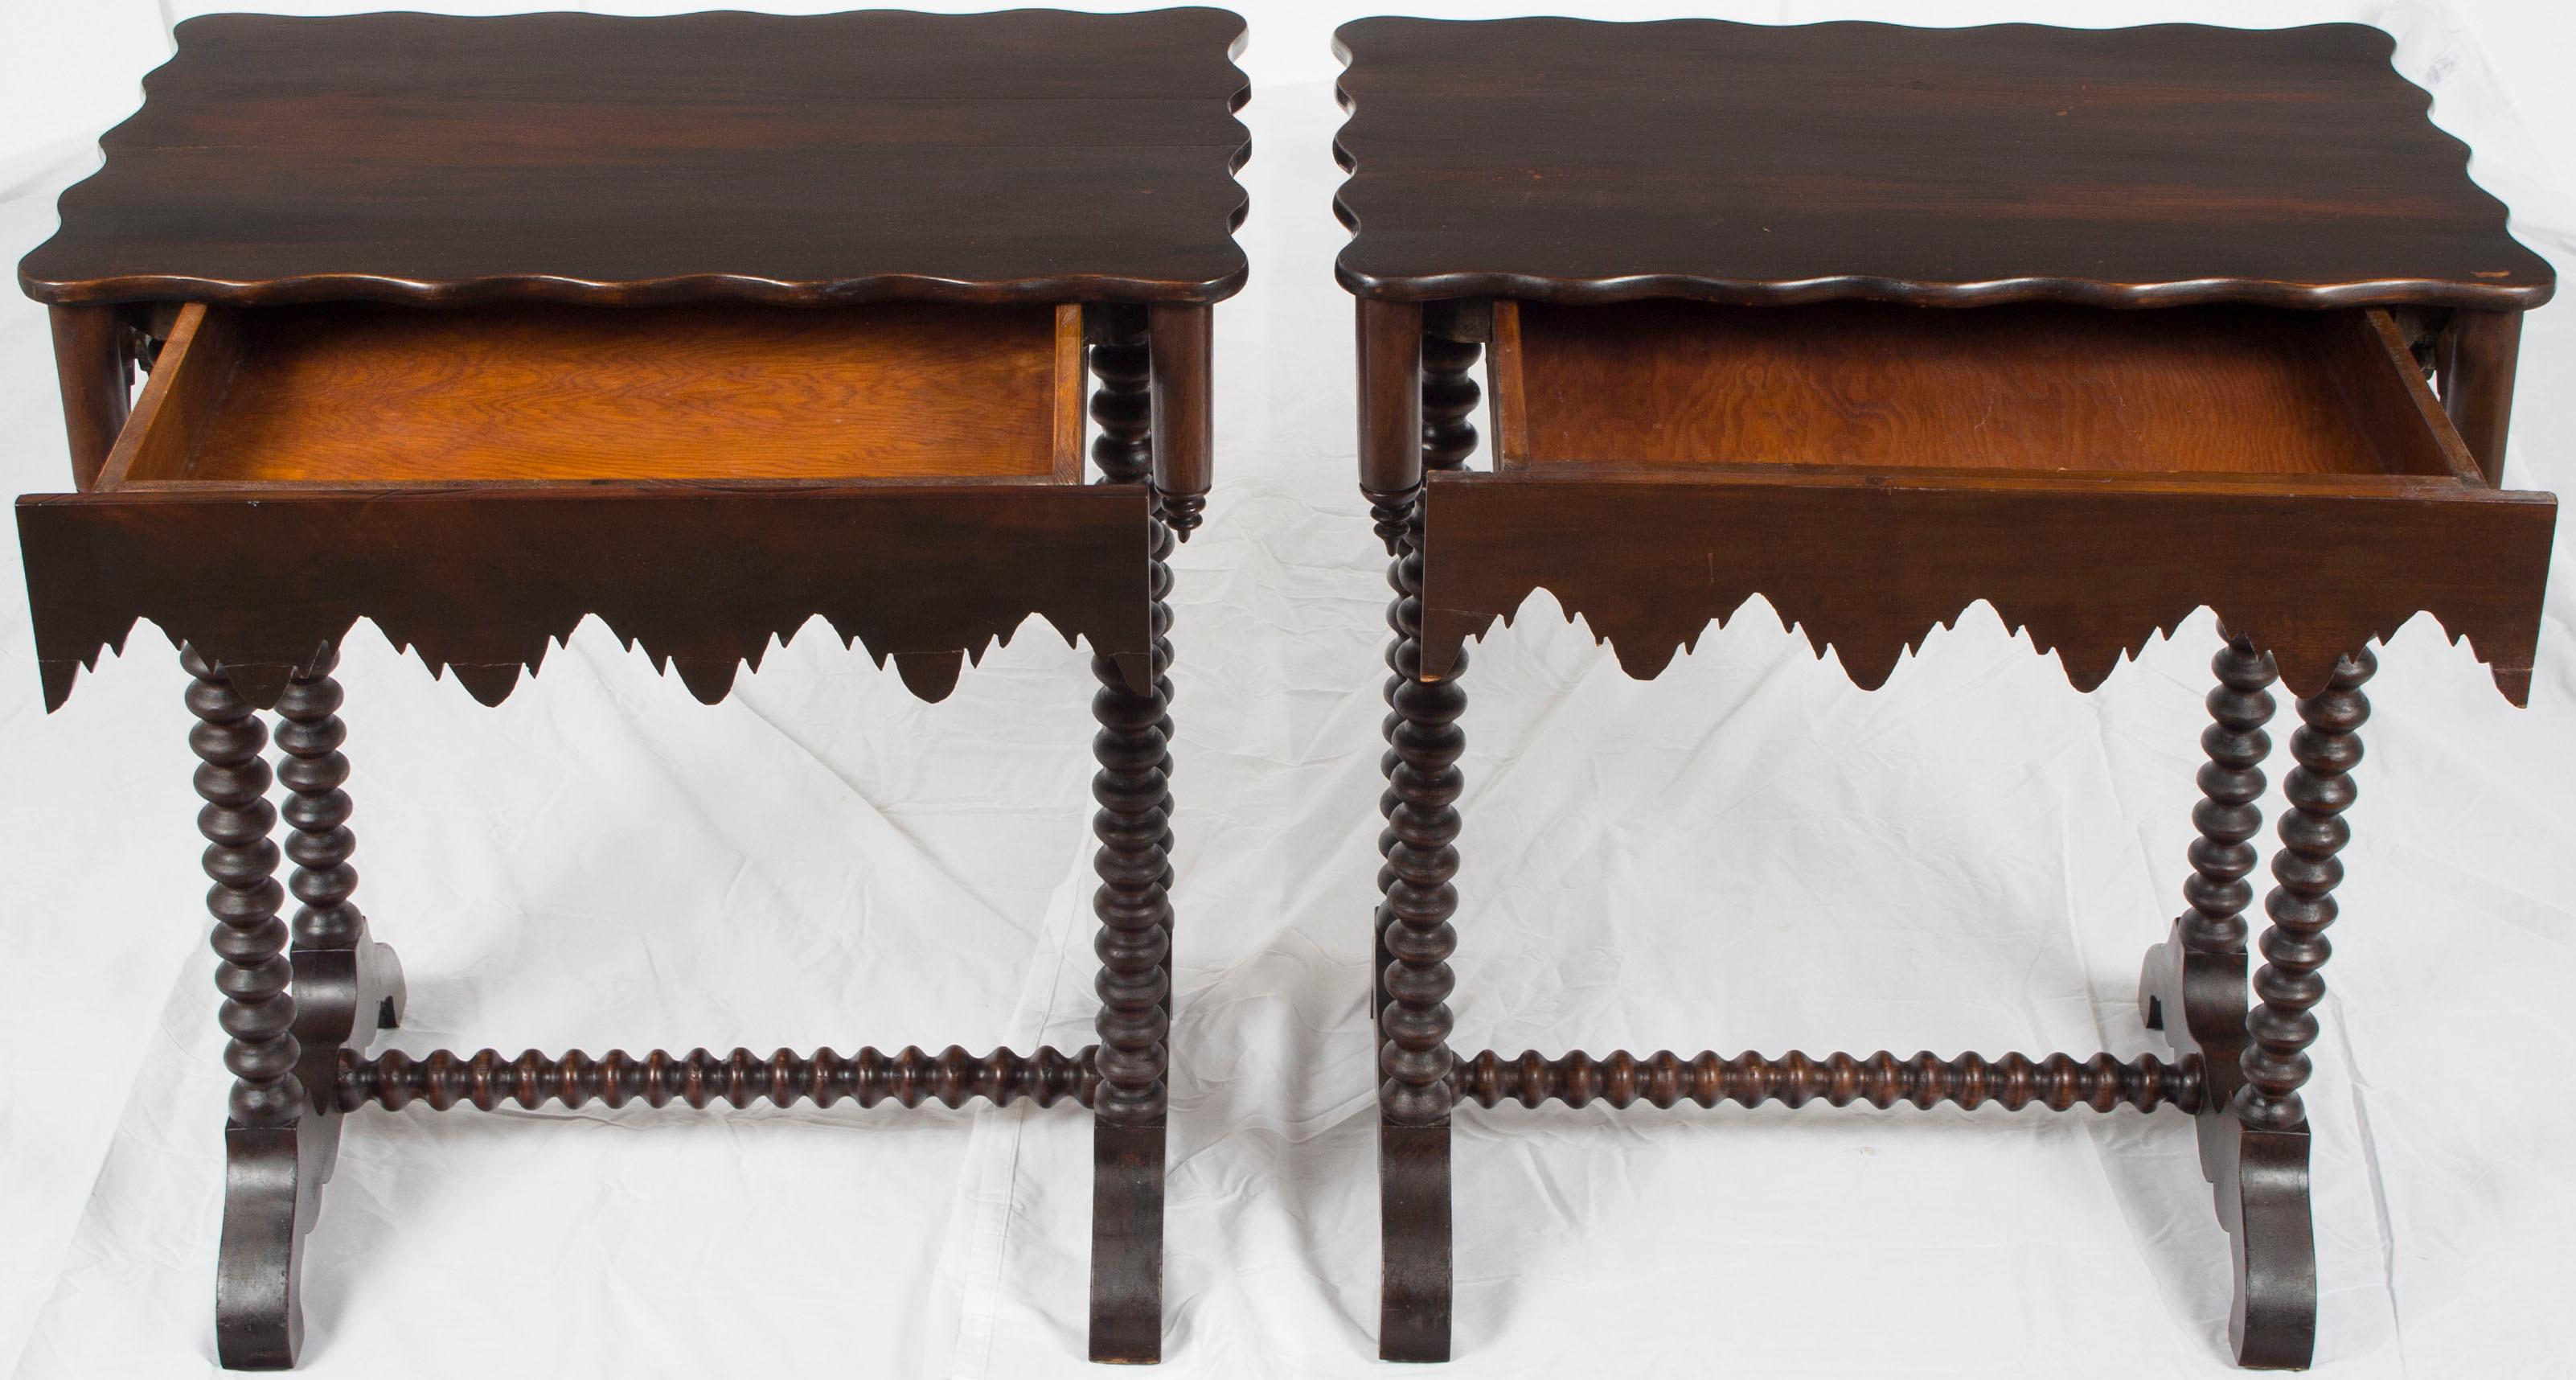 In truly Gothic style, this pair of mahogany end tables make a real statement! Shaped tops, twist turned legs, and uniquely shaped arched aprons really give credence to the style. Rounded corners with upside down finials finish the look off nicely.